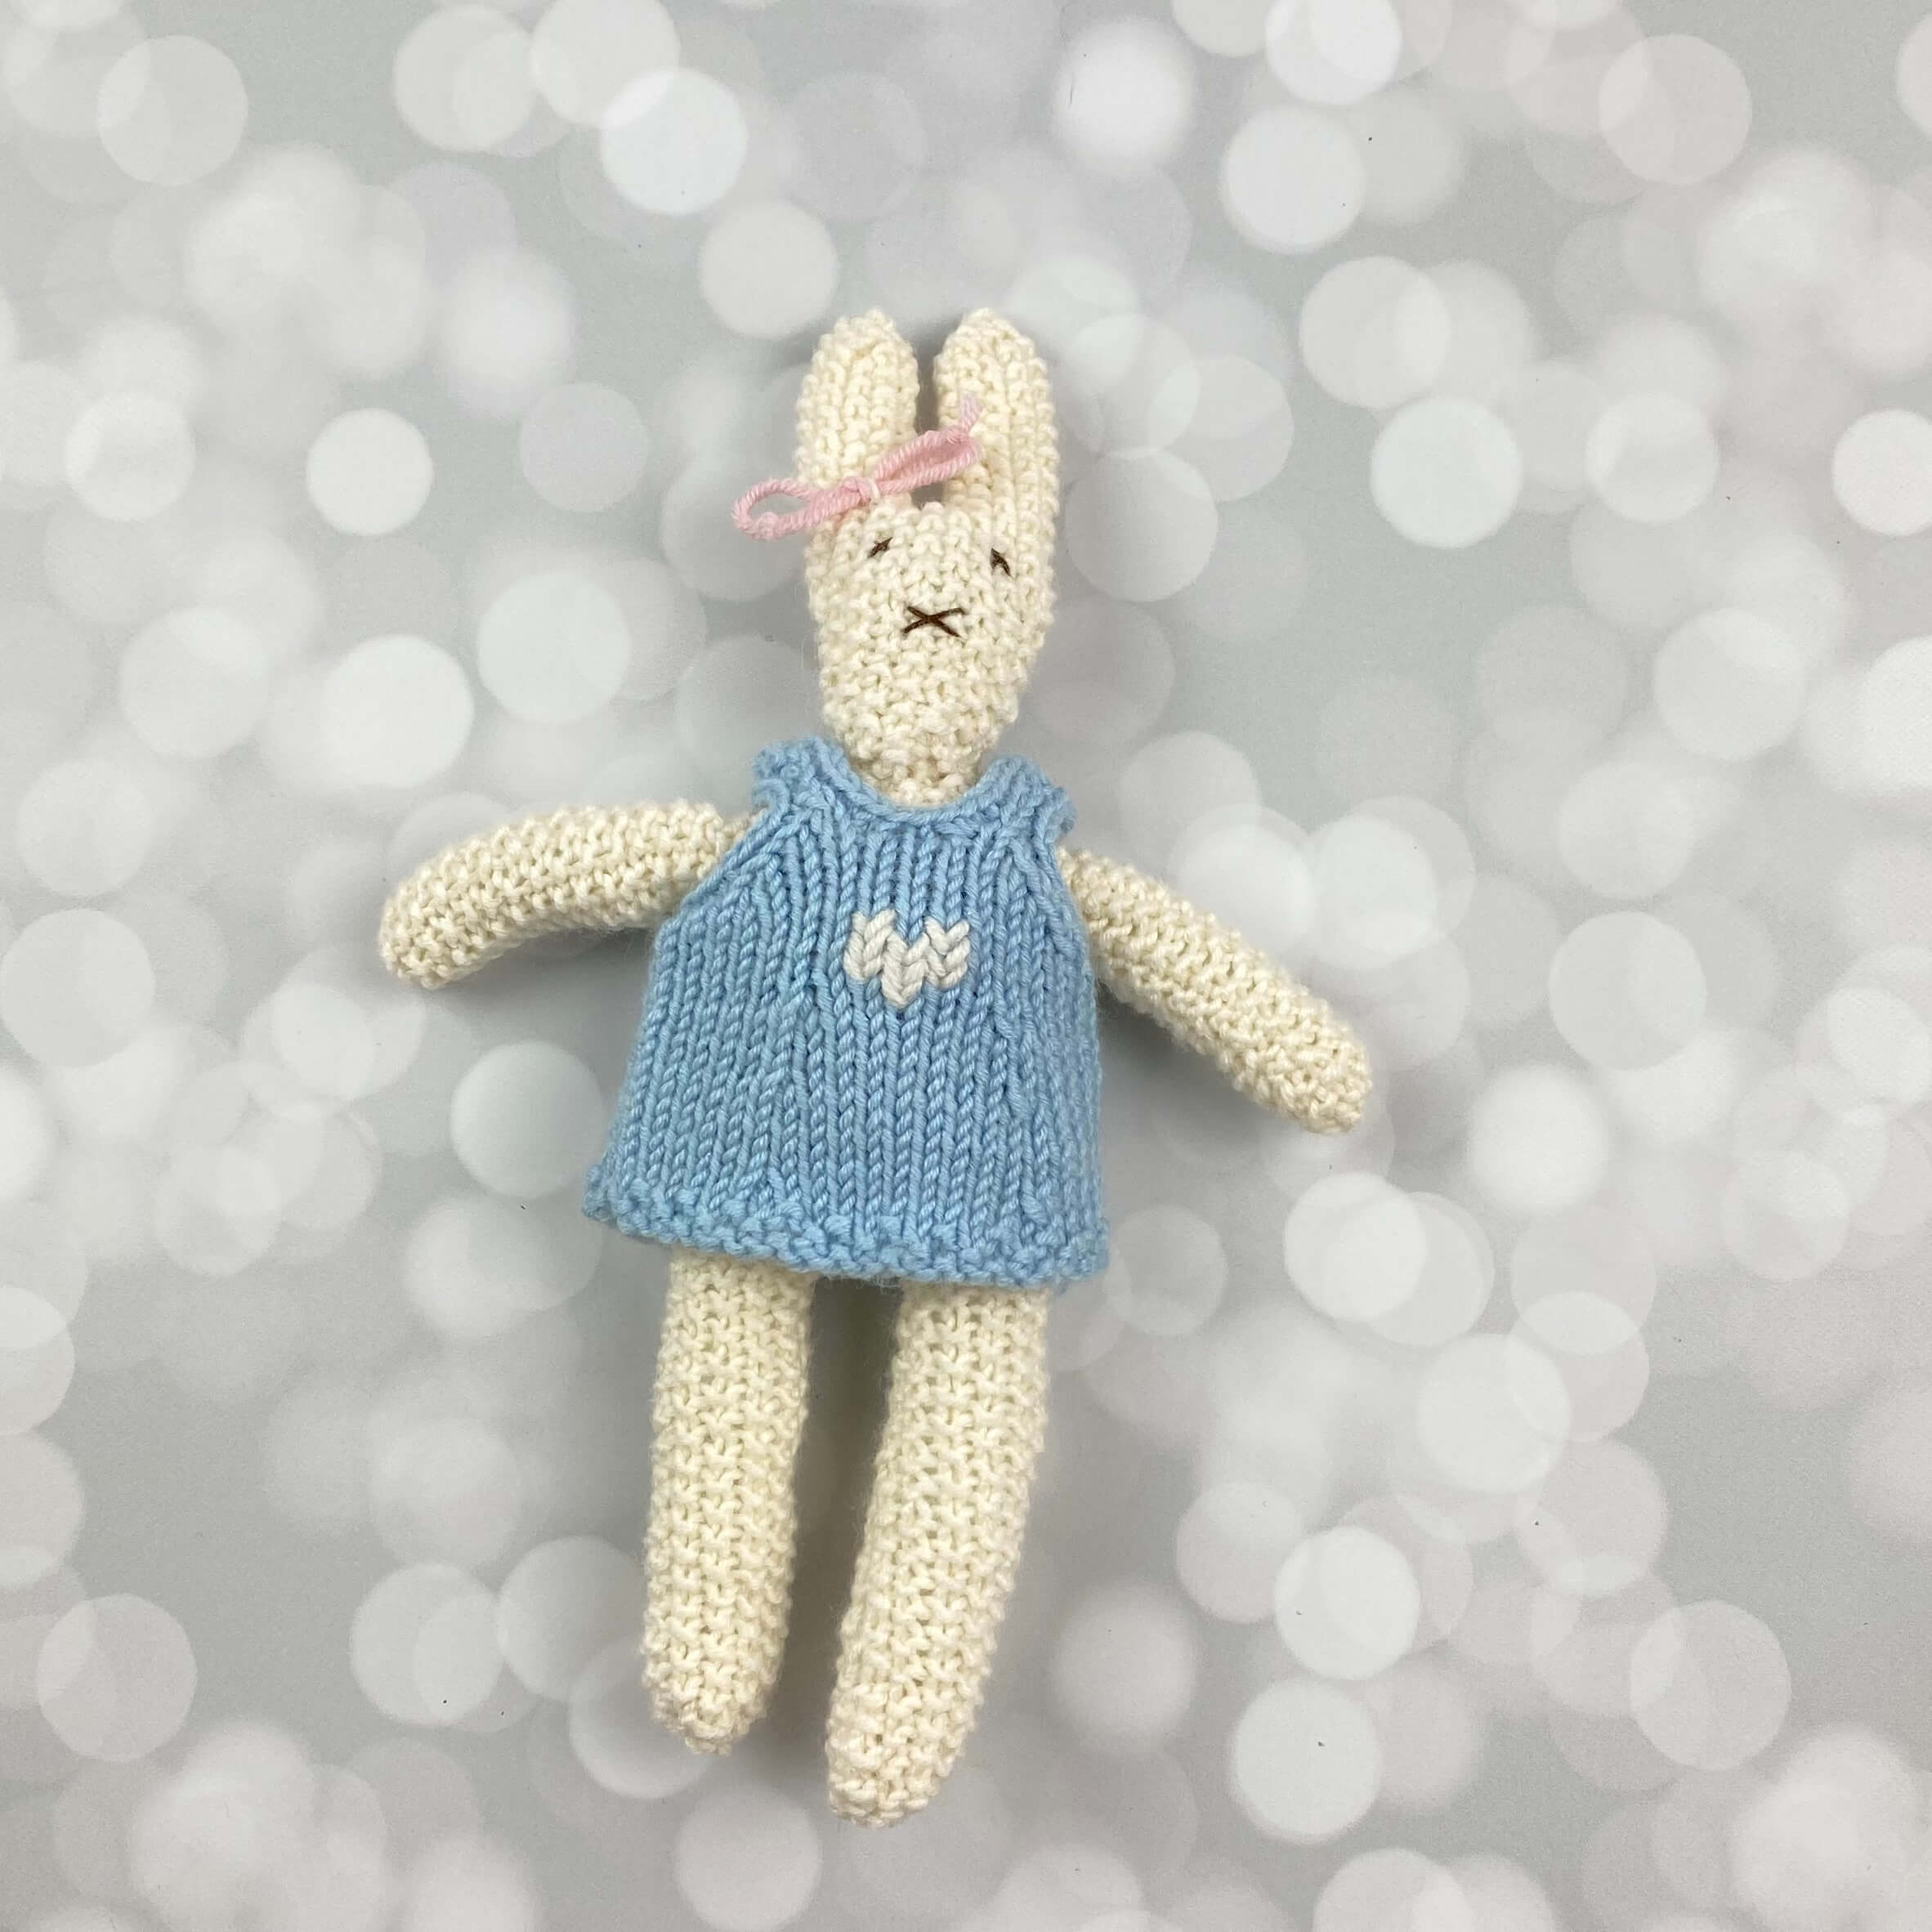 hand knitted rabbit with a blue dress. About 8" tall